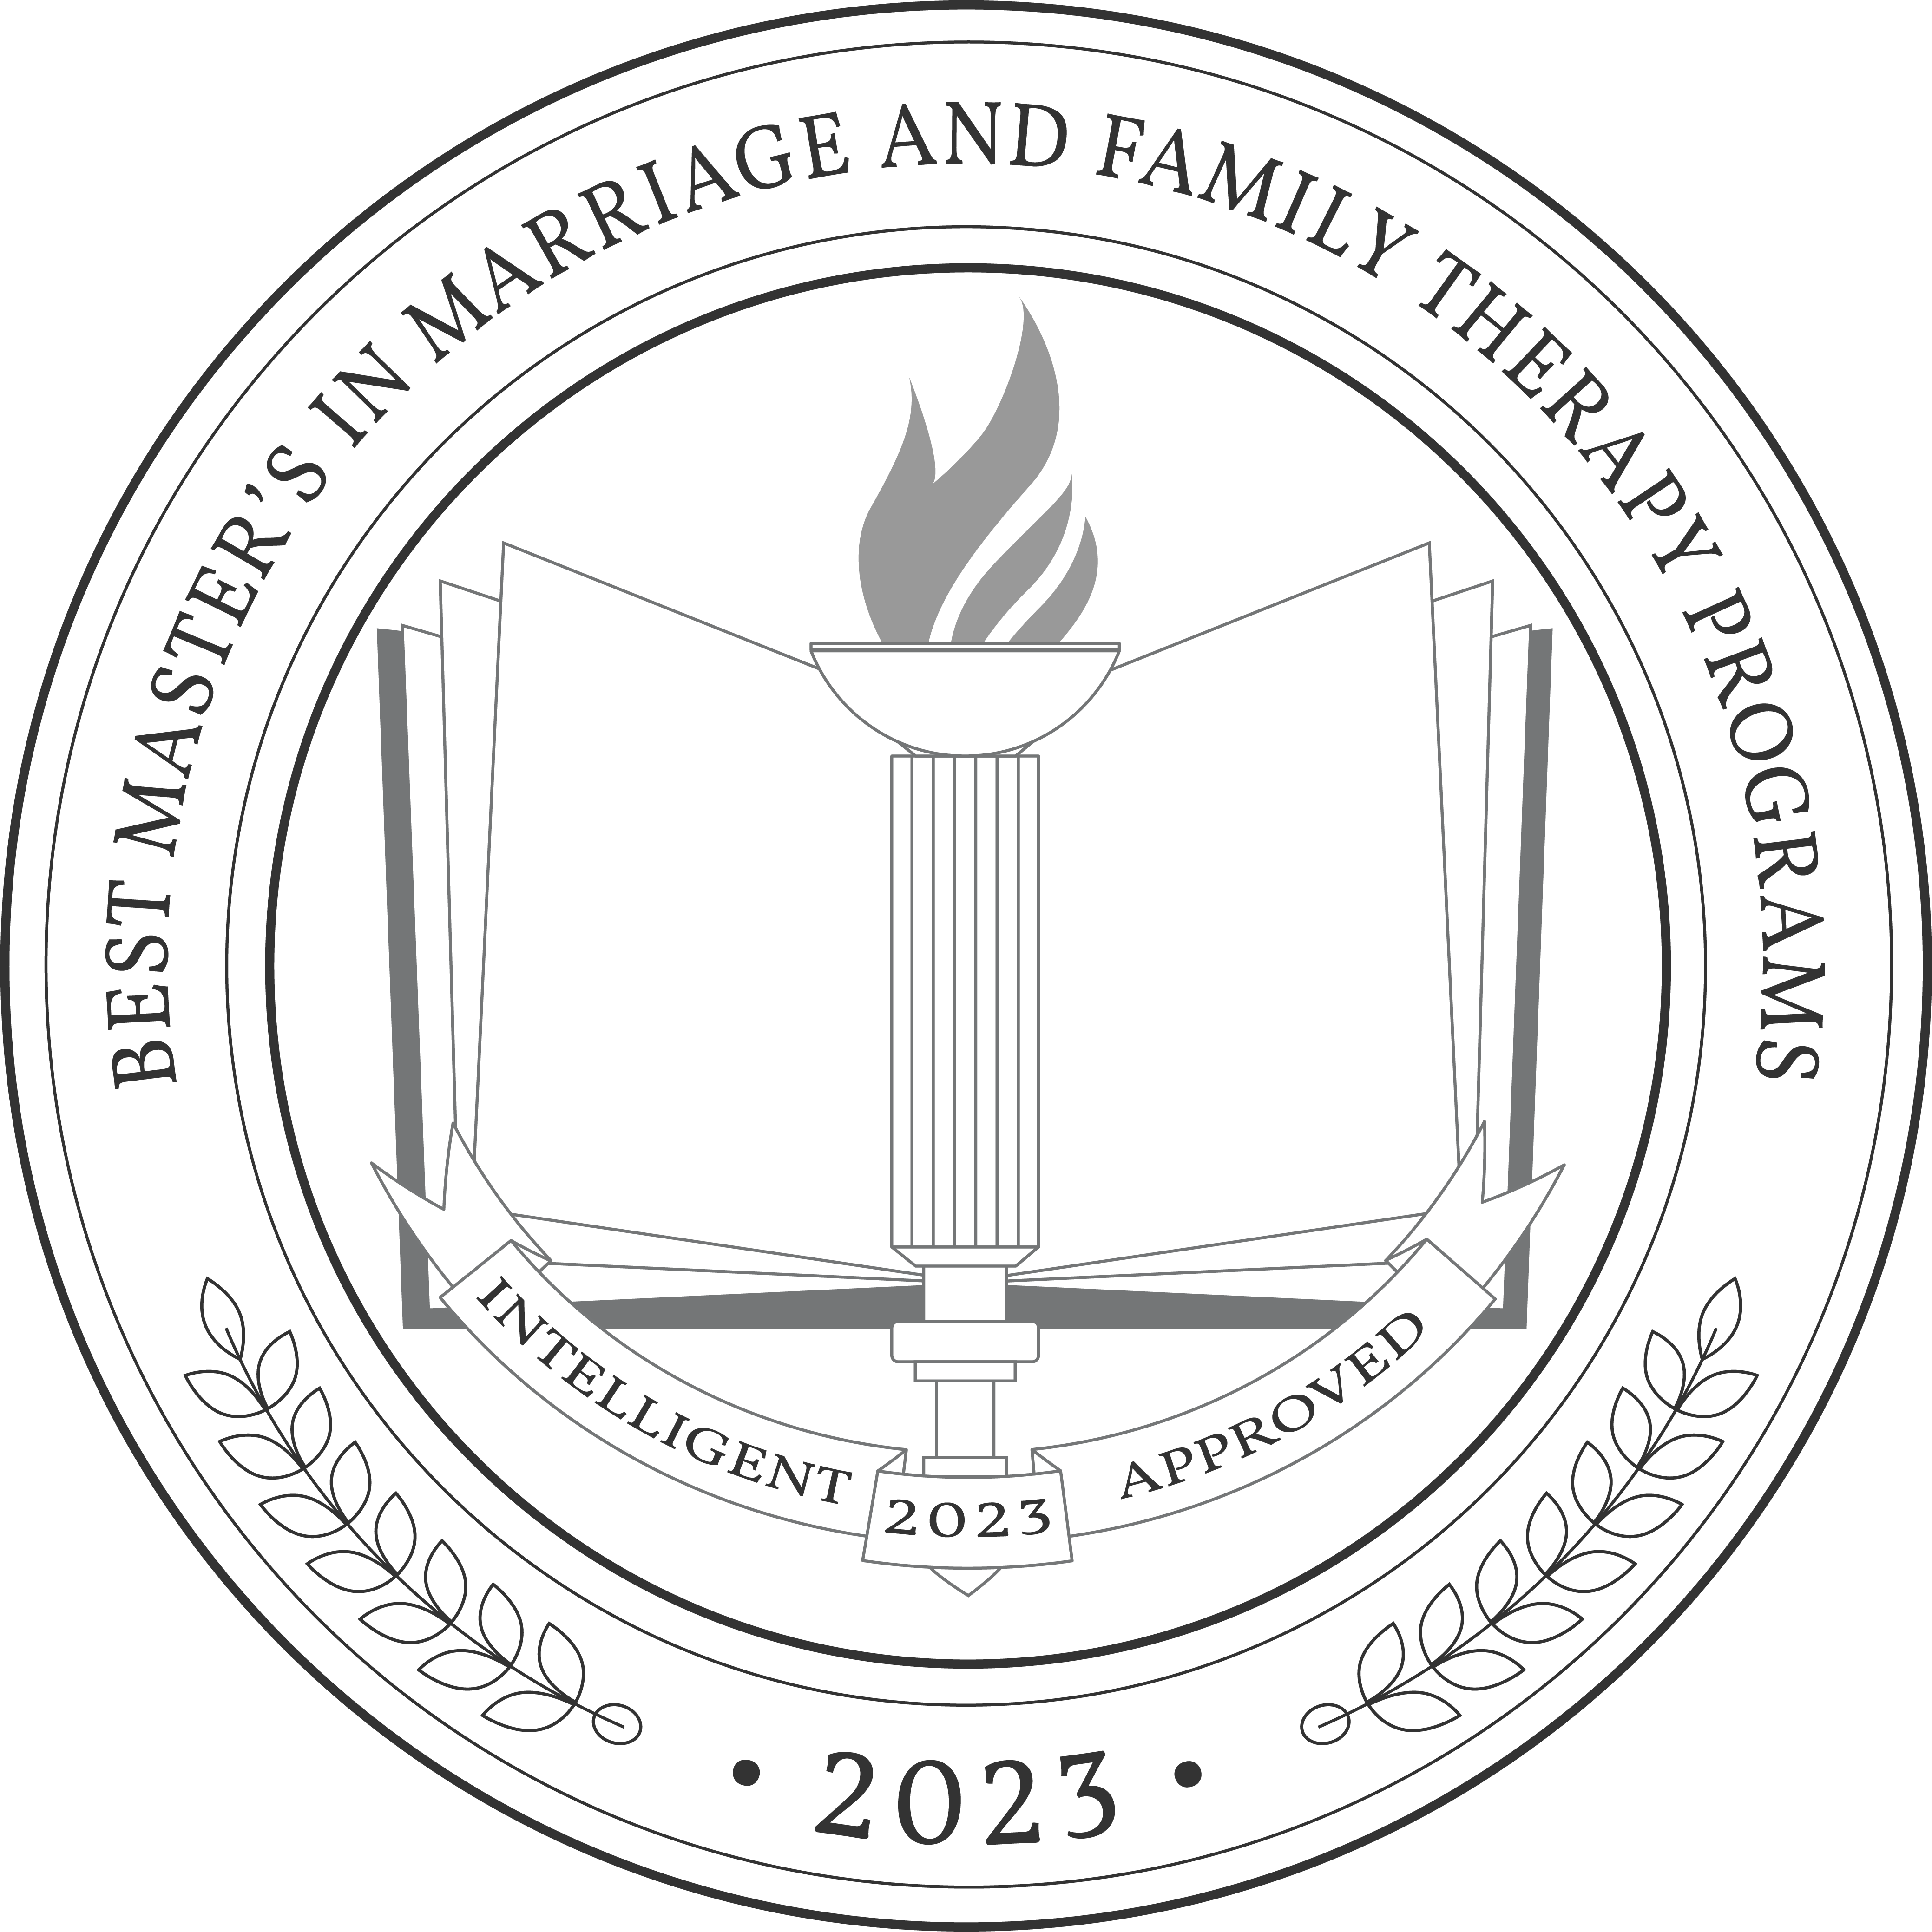 Best Master's in Marriage and Family Therapy Programs badge